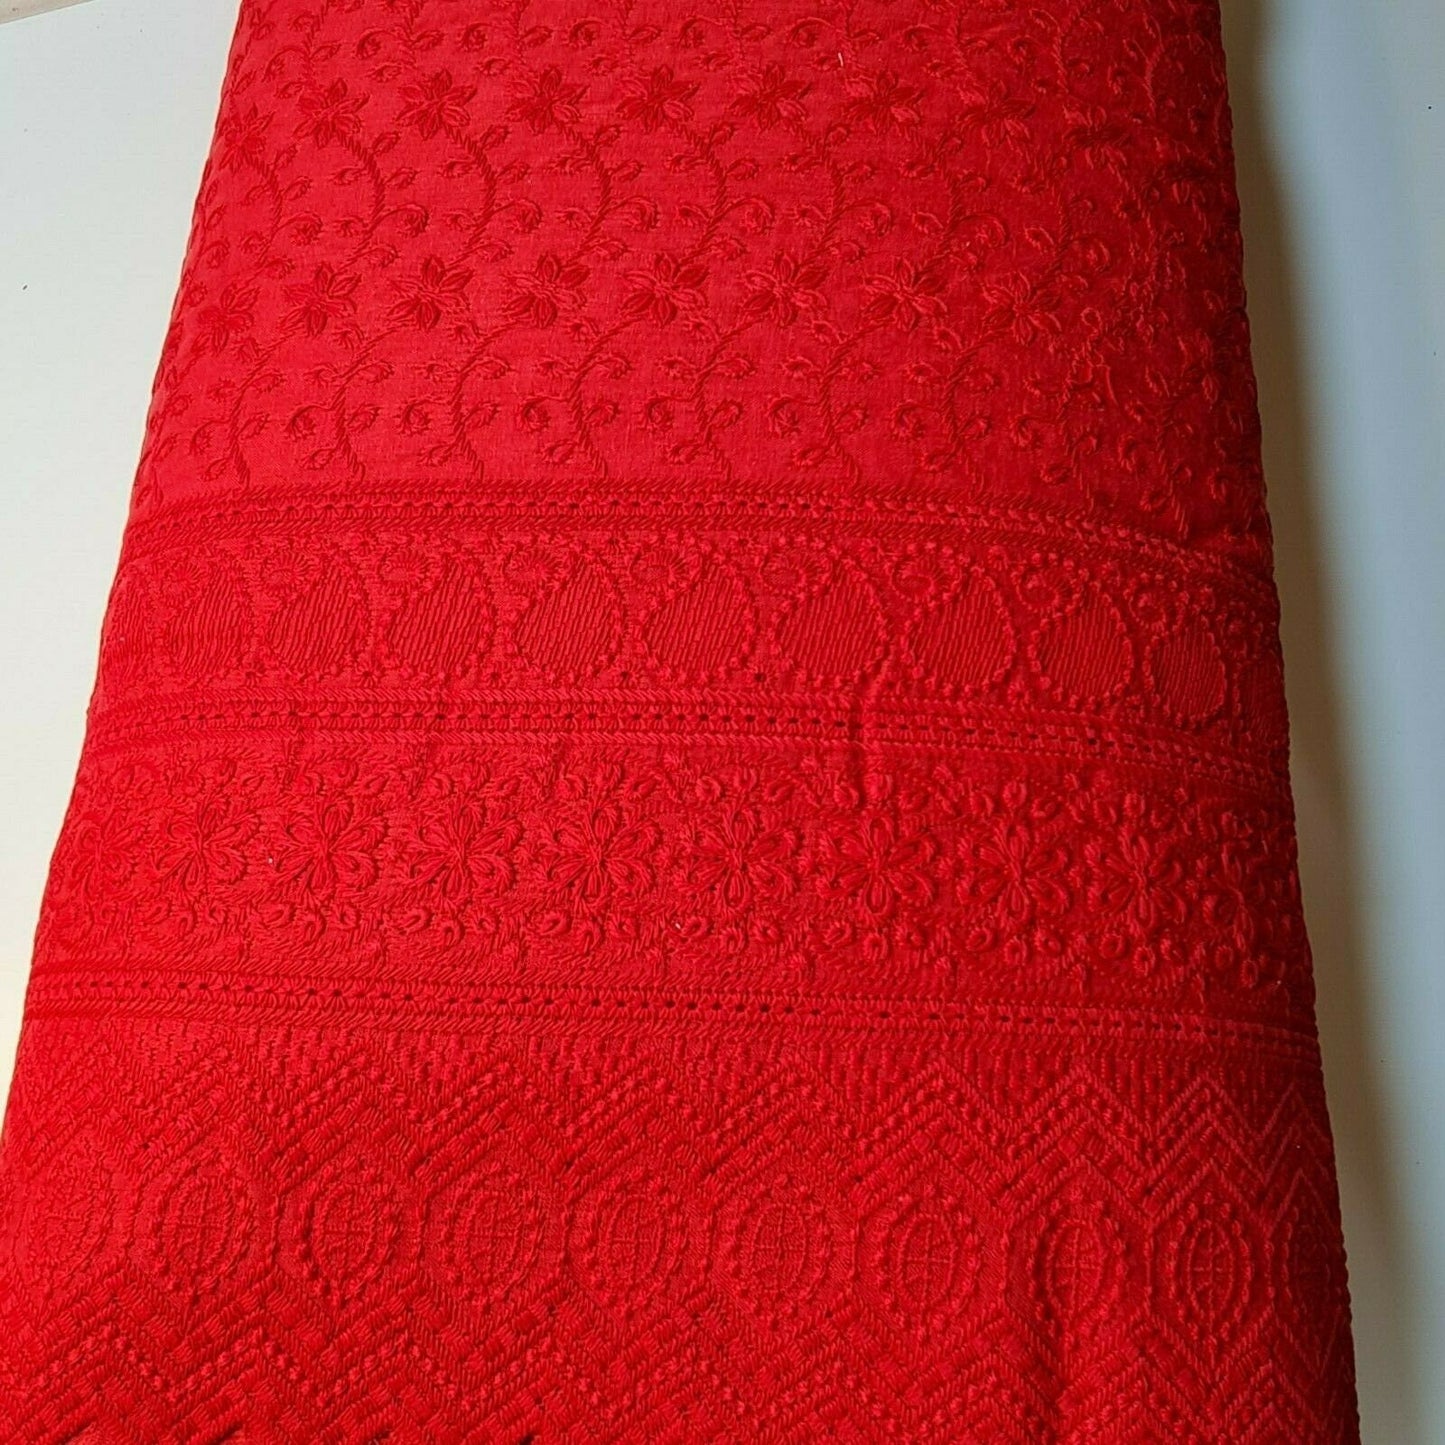 NEW SPRING 100% Cotton Lawn Broderie Anglaise Embroidery Dress Craft Fabric 44" (Red)